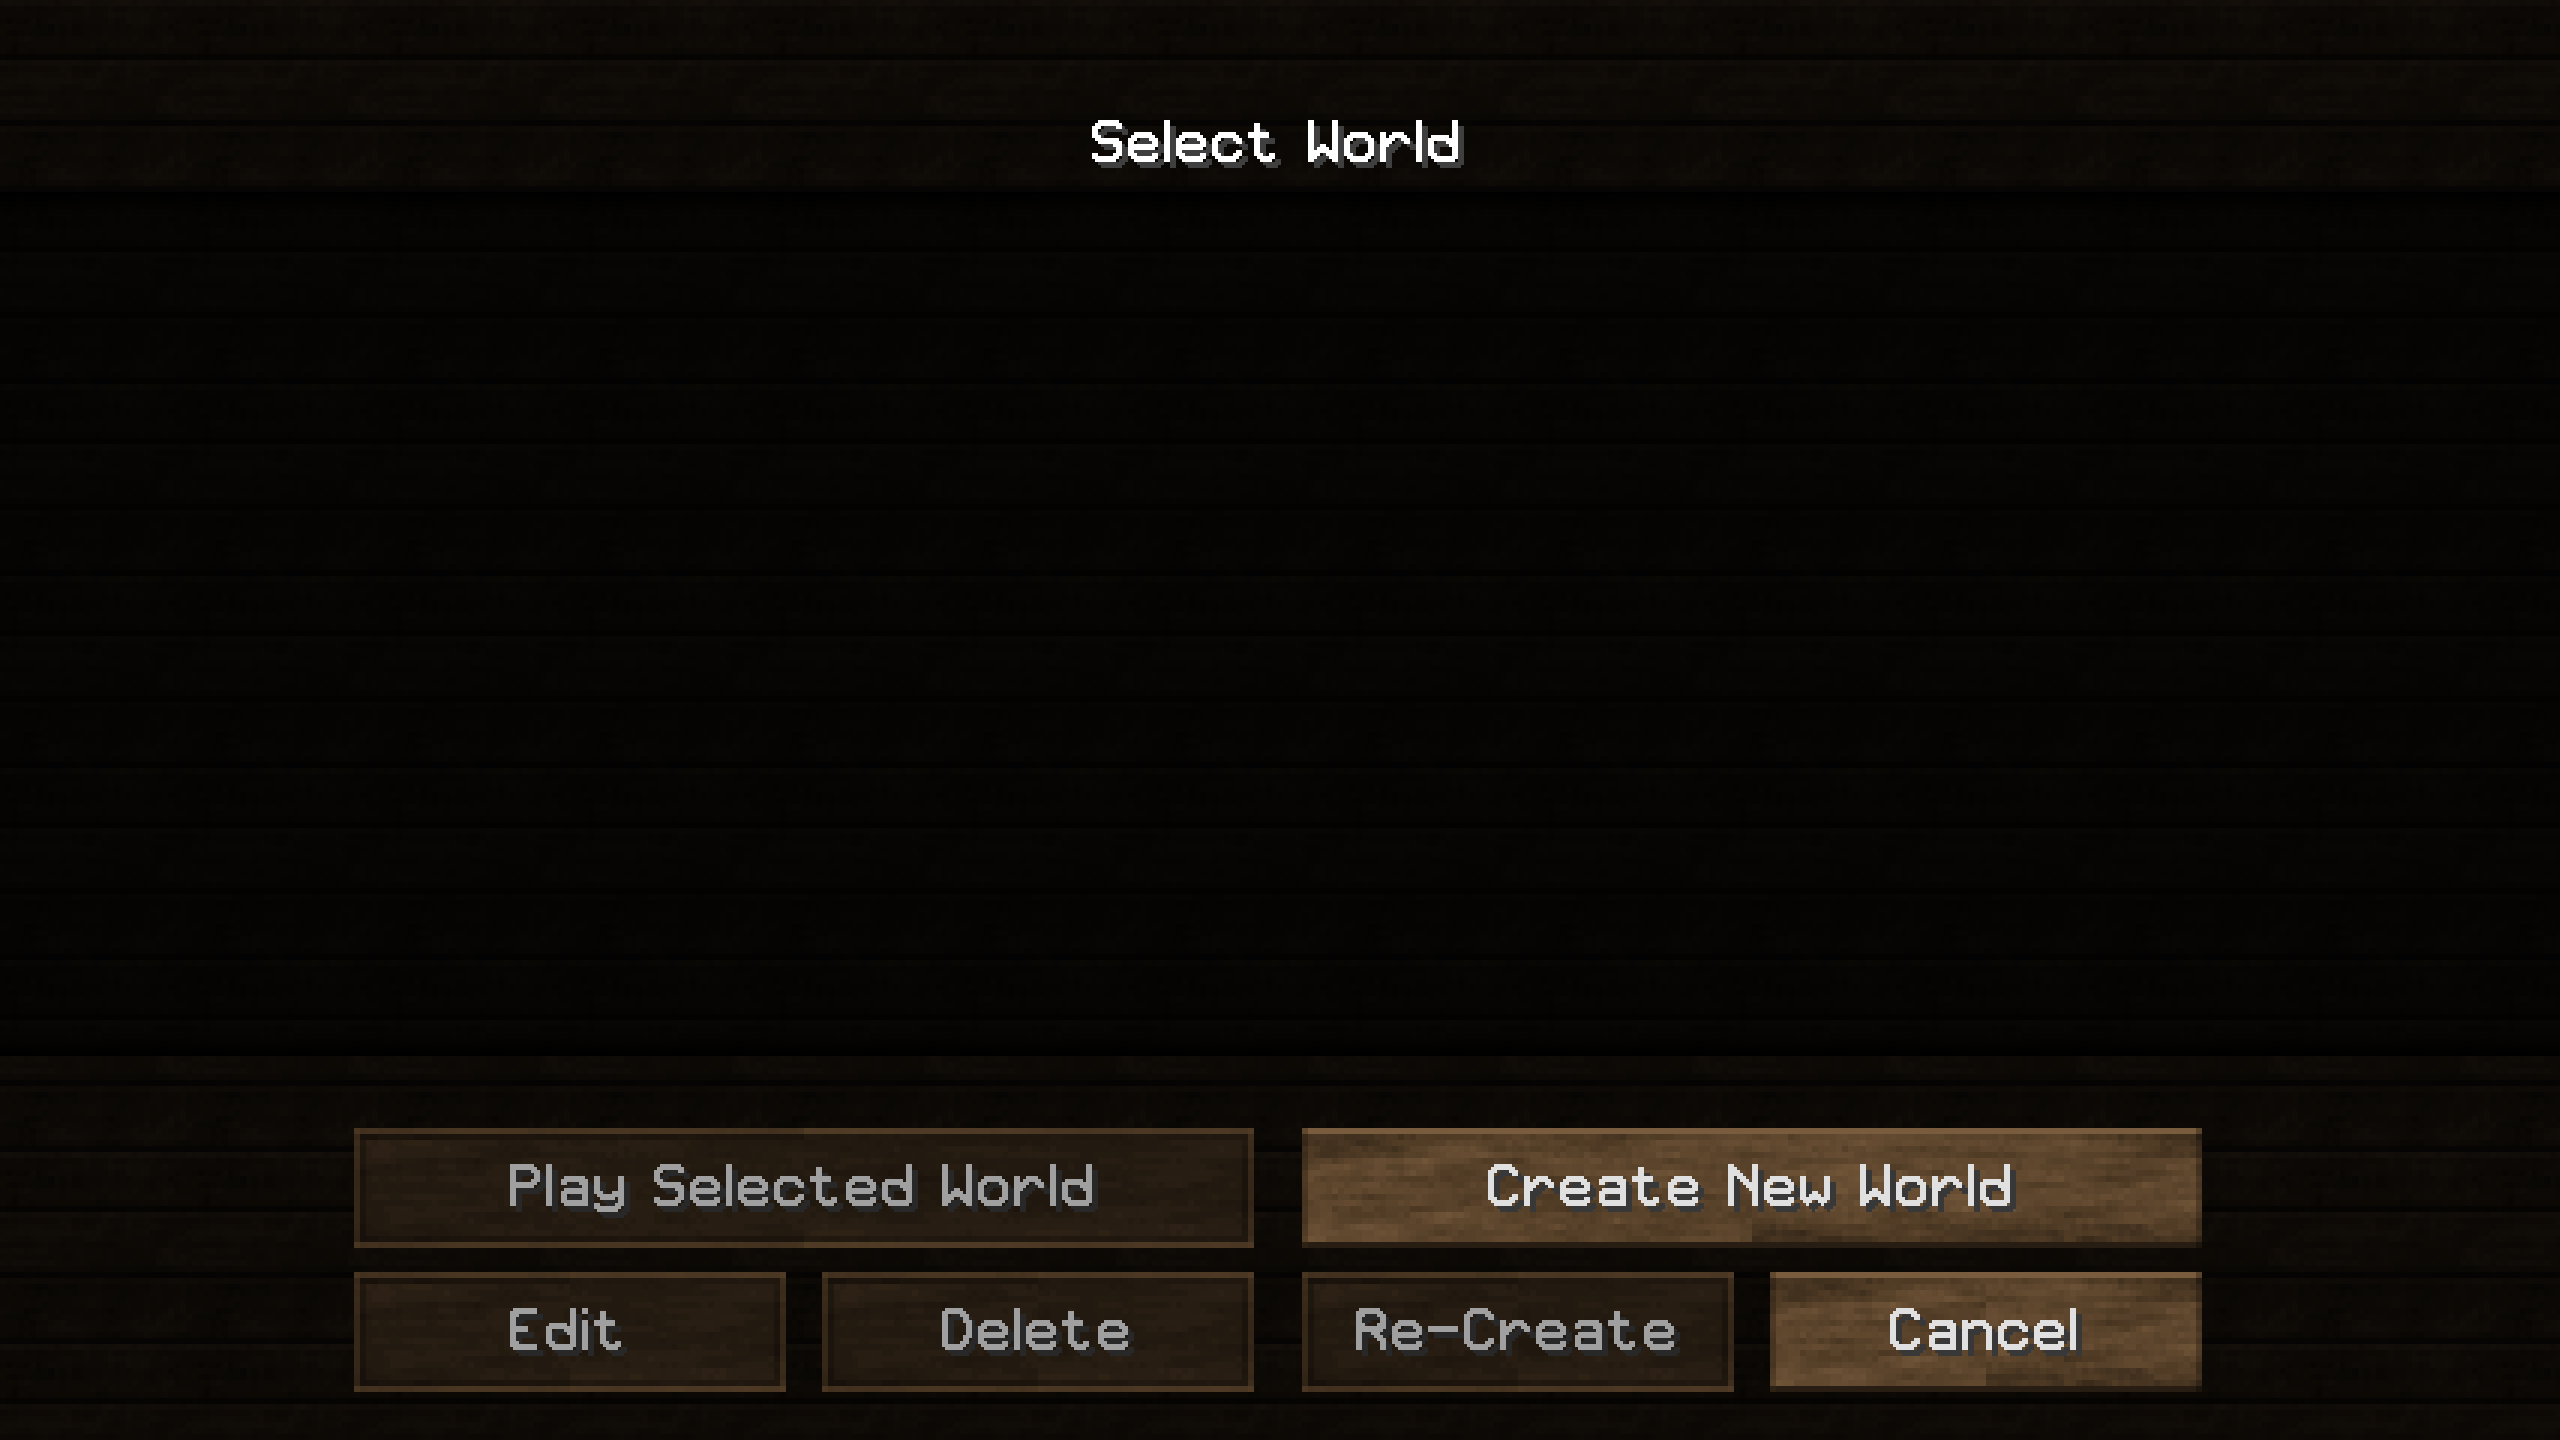 Play Selected World